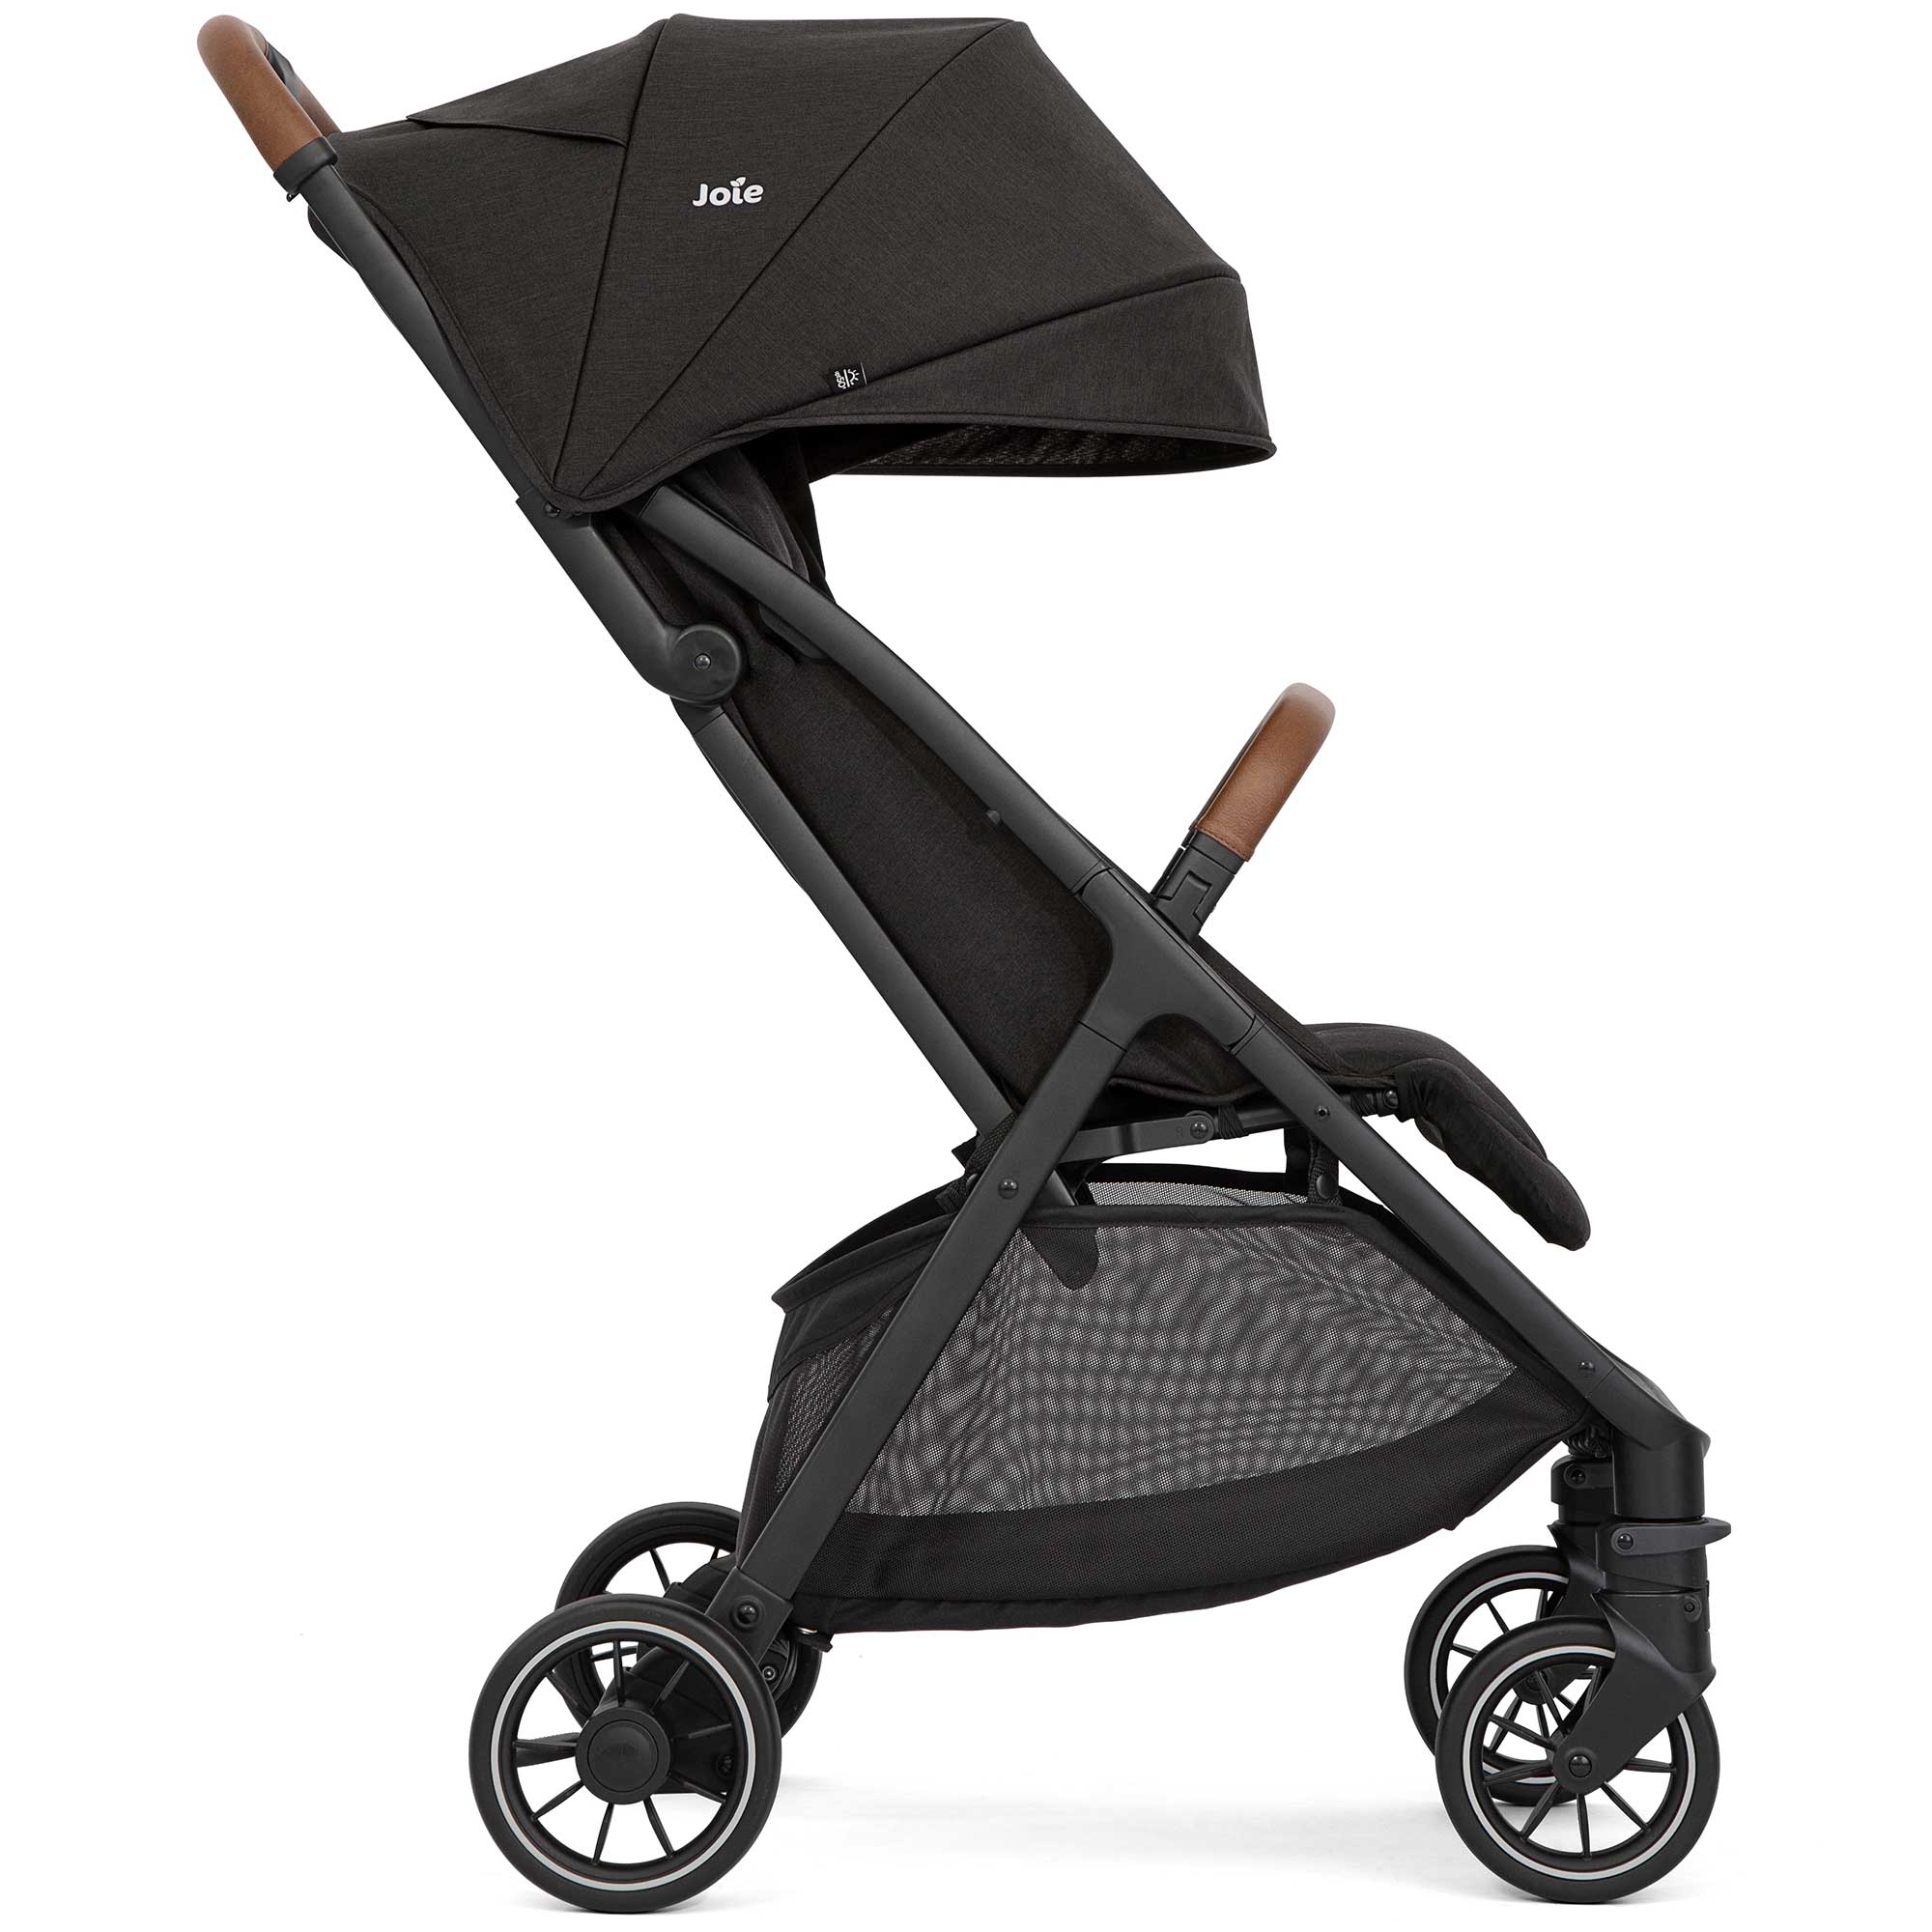 Joie Pact Pro Stroller in Shale Pushchairs & Buggies S2308AASHA000 5056080617954